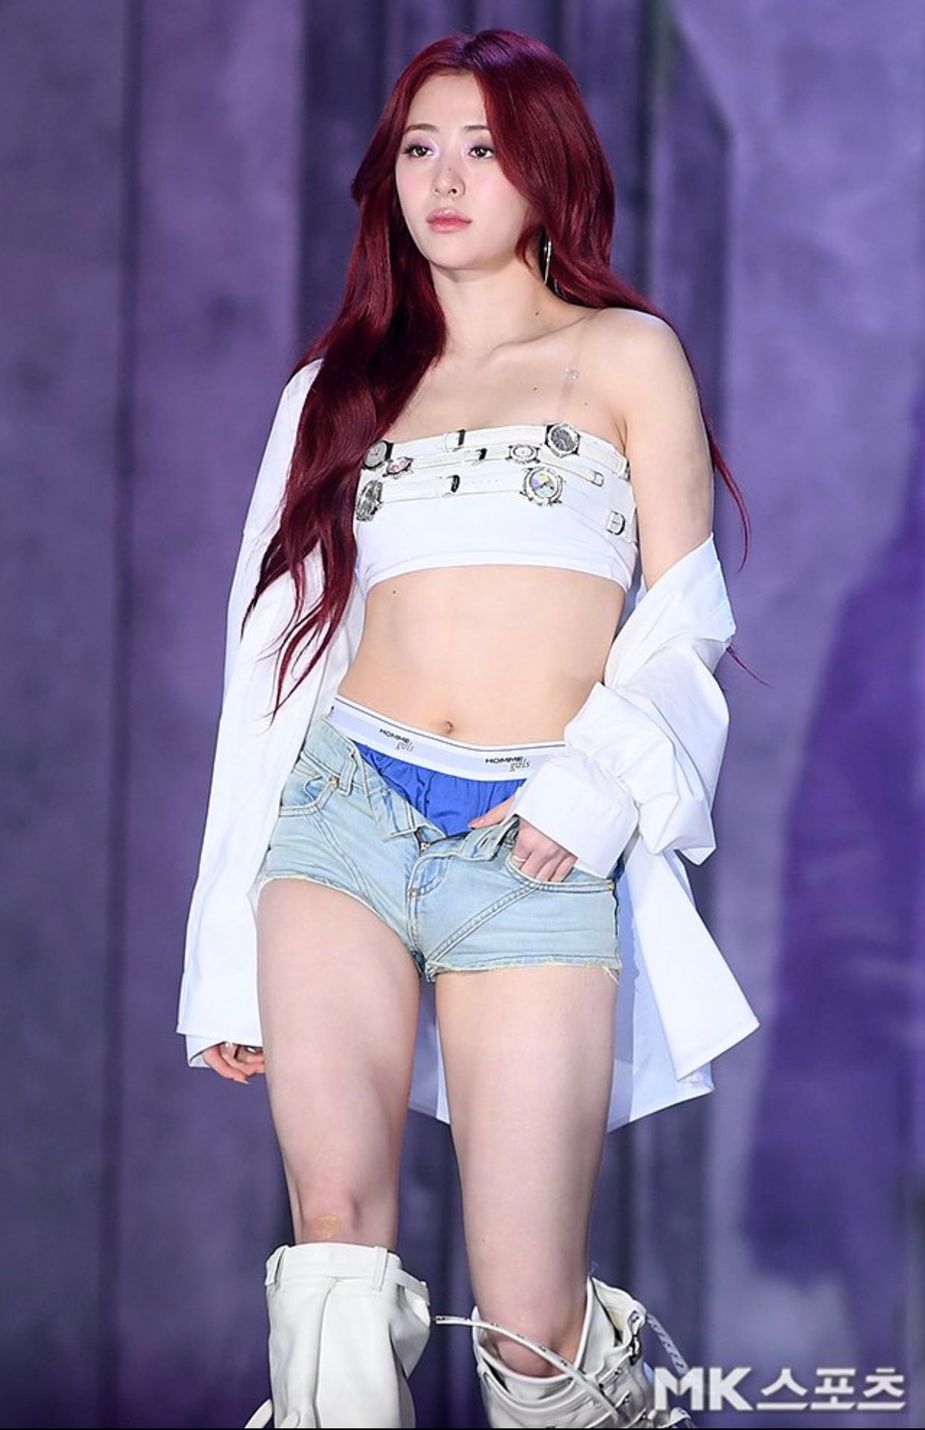 Huh Yun-jin's Underwear, Moon Ga-young's Underboob: Female Stars'  Ground-breaking Fashion Becomes A Hot Topic